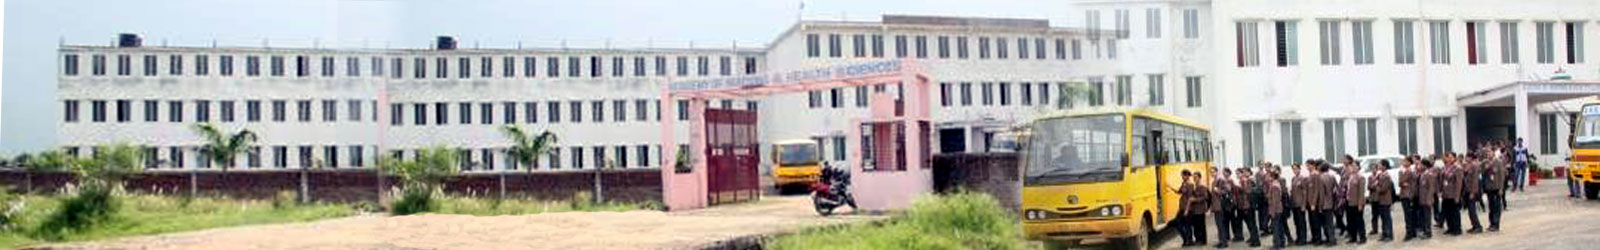 Academy Of Nursing and Health Sciences, Bhopal Image